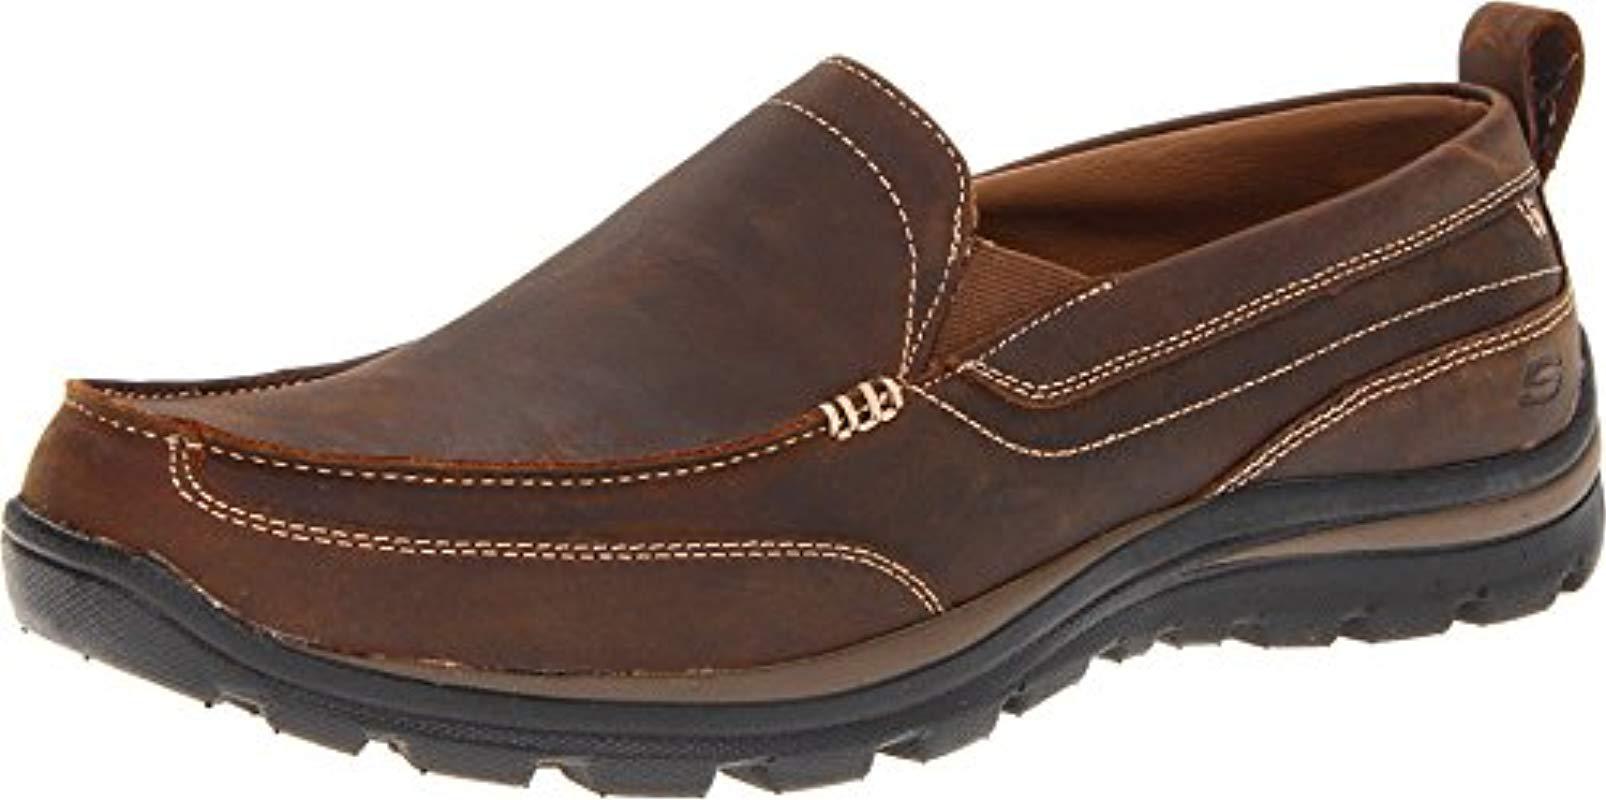 Lyst - Skechers Relaxed Fit Memory Foam Superior Gains Slip-on in Brown ...